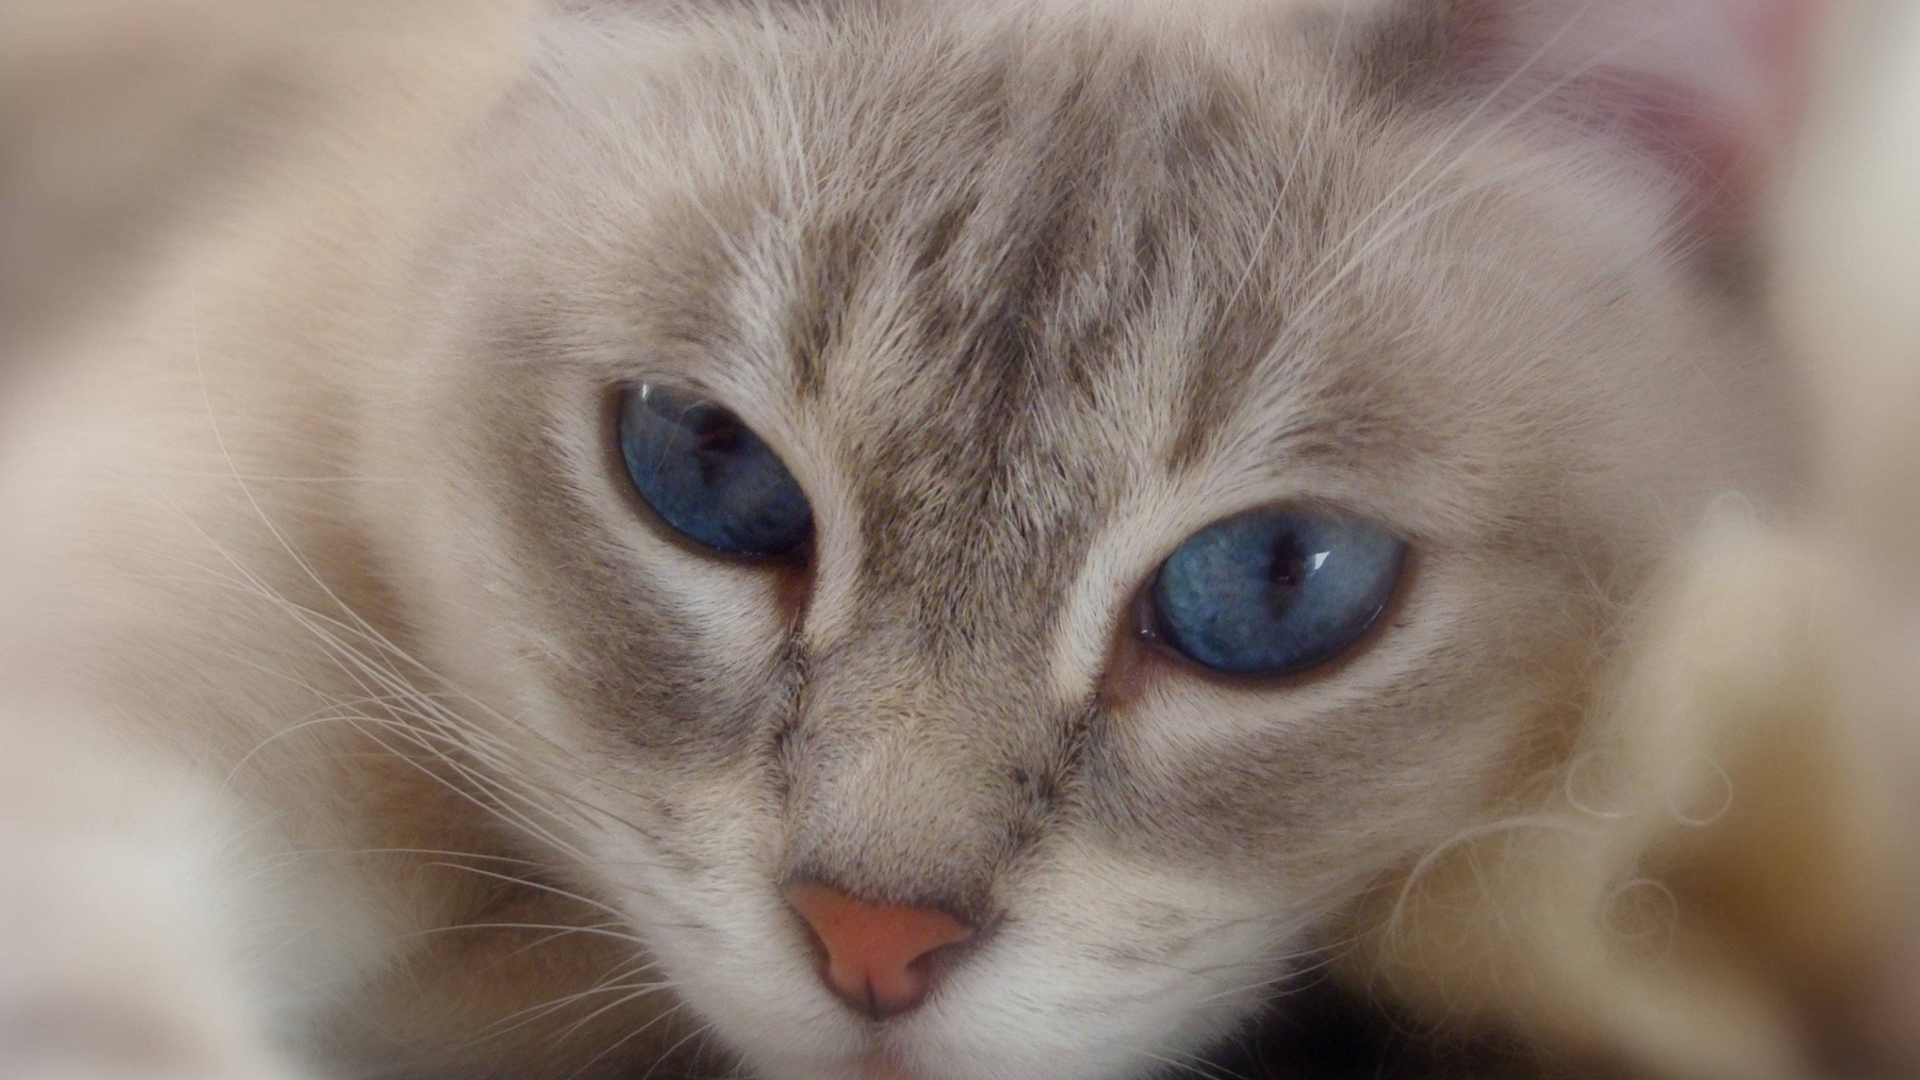 Cat With Blue Eyes wallpaper 1920x1080